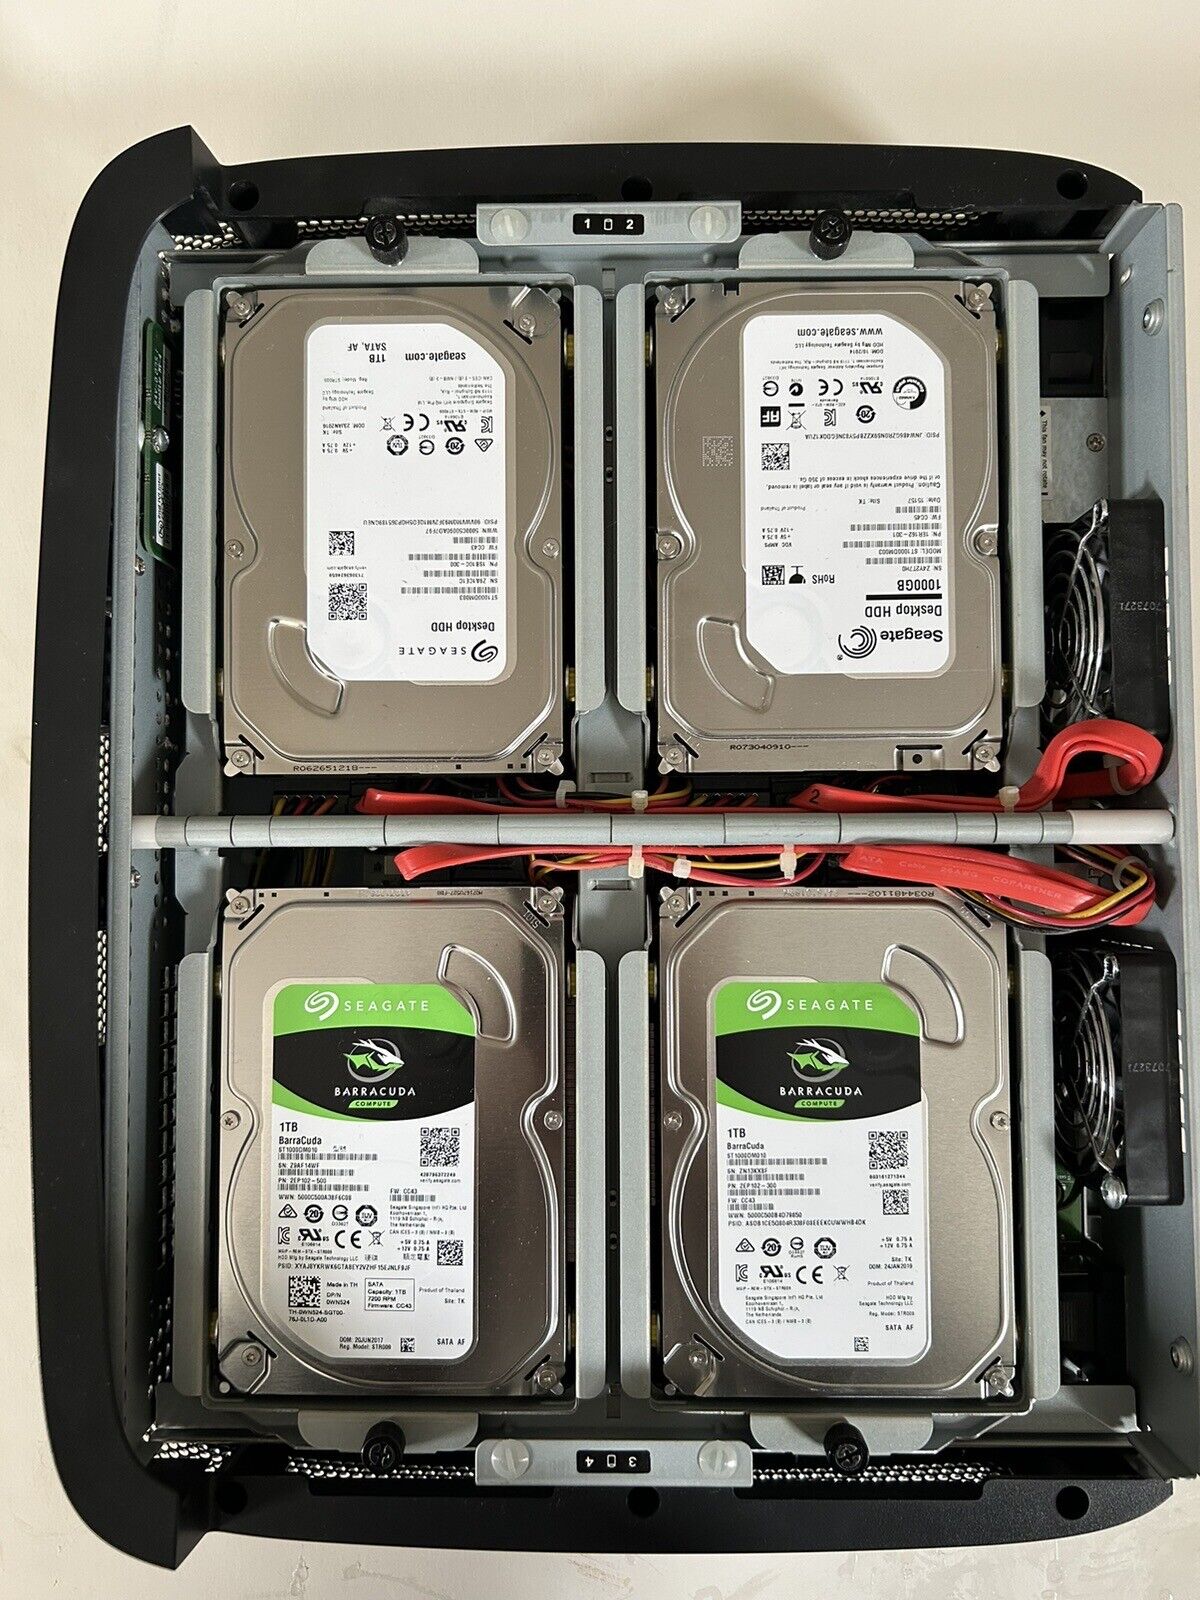 Intel SS4200-E Entry Storage System (NAS) with 4x1 TB Hard Drives